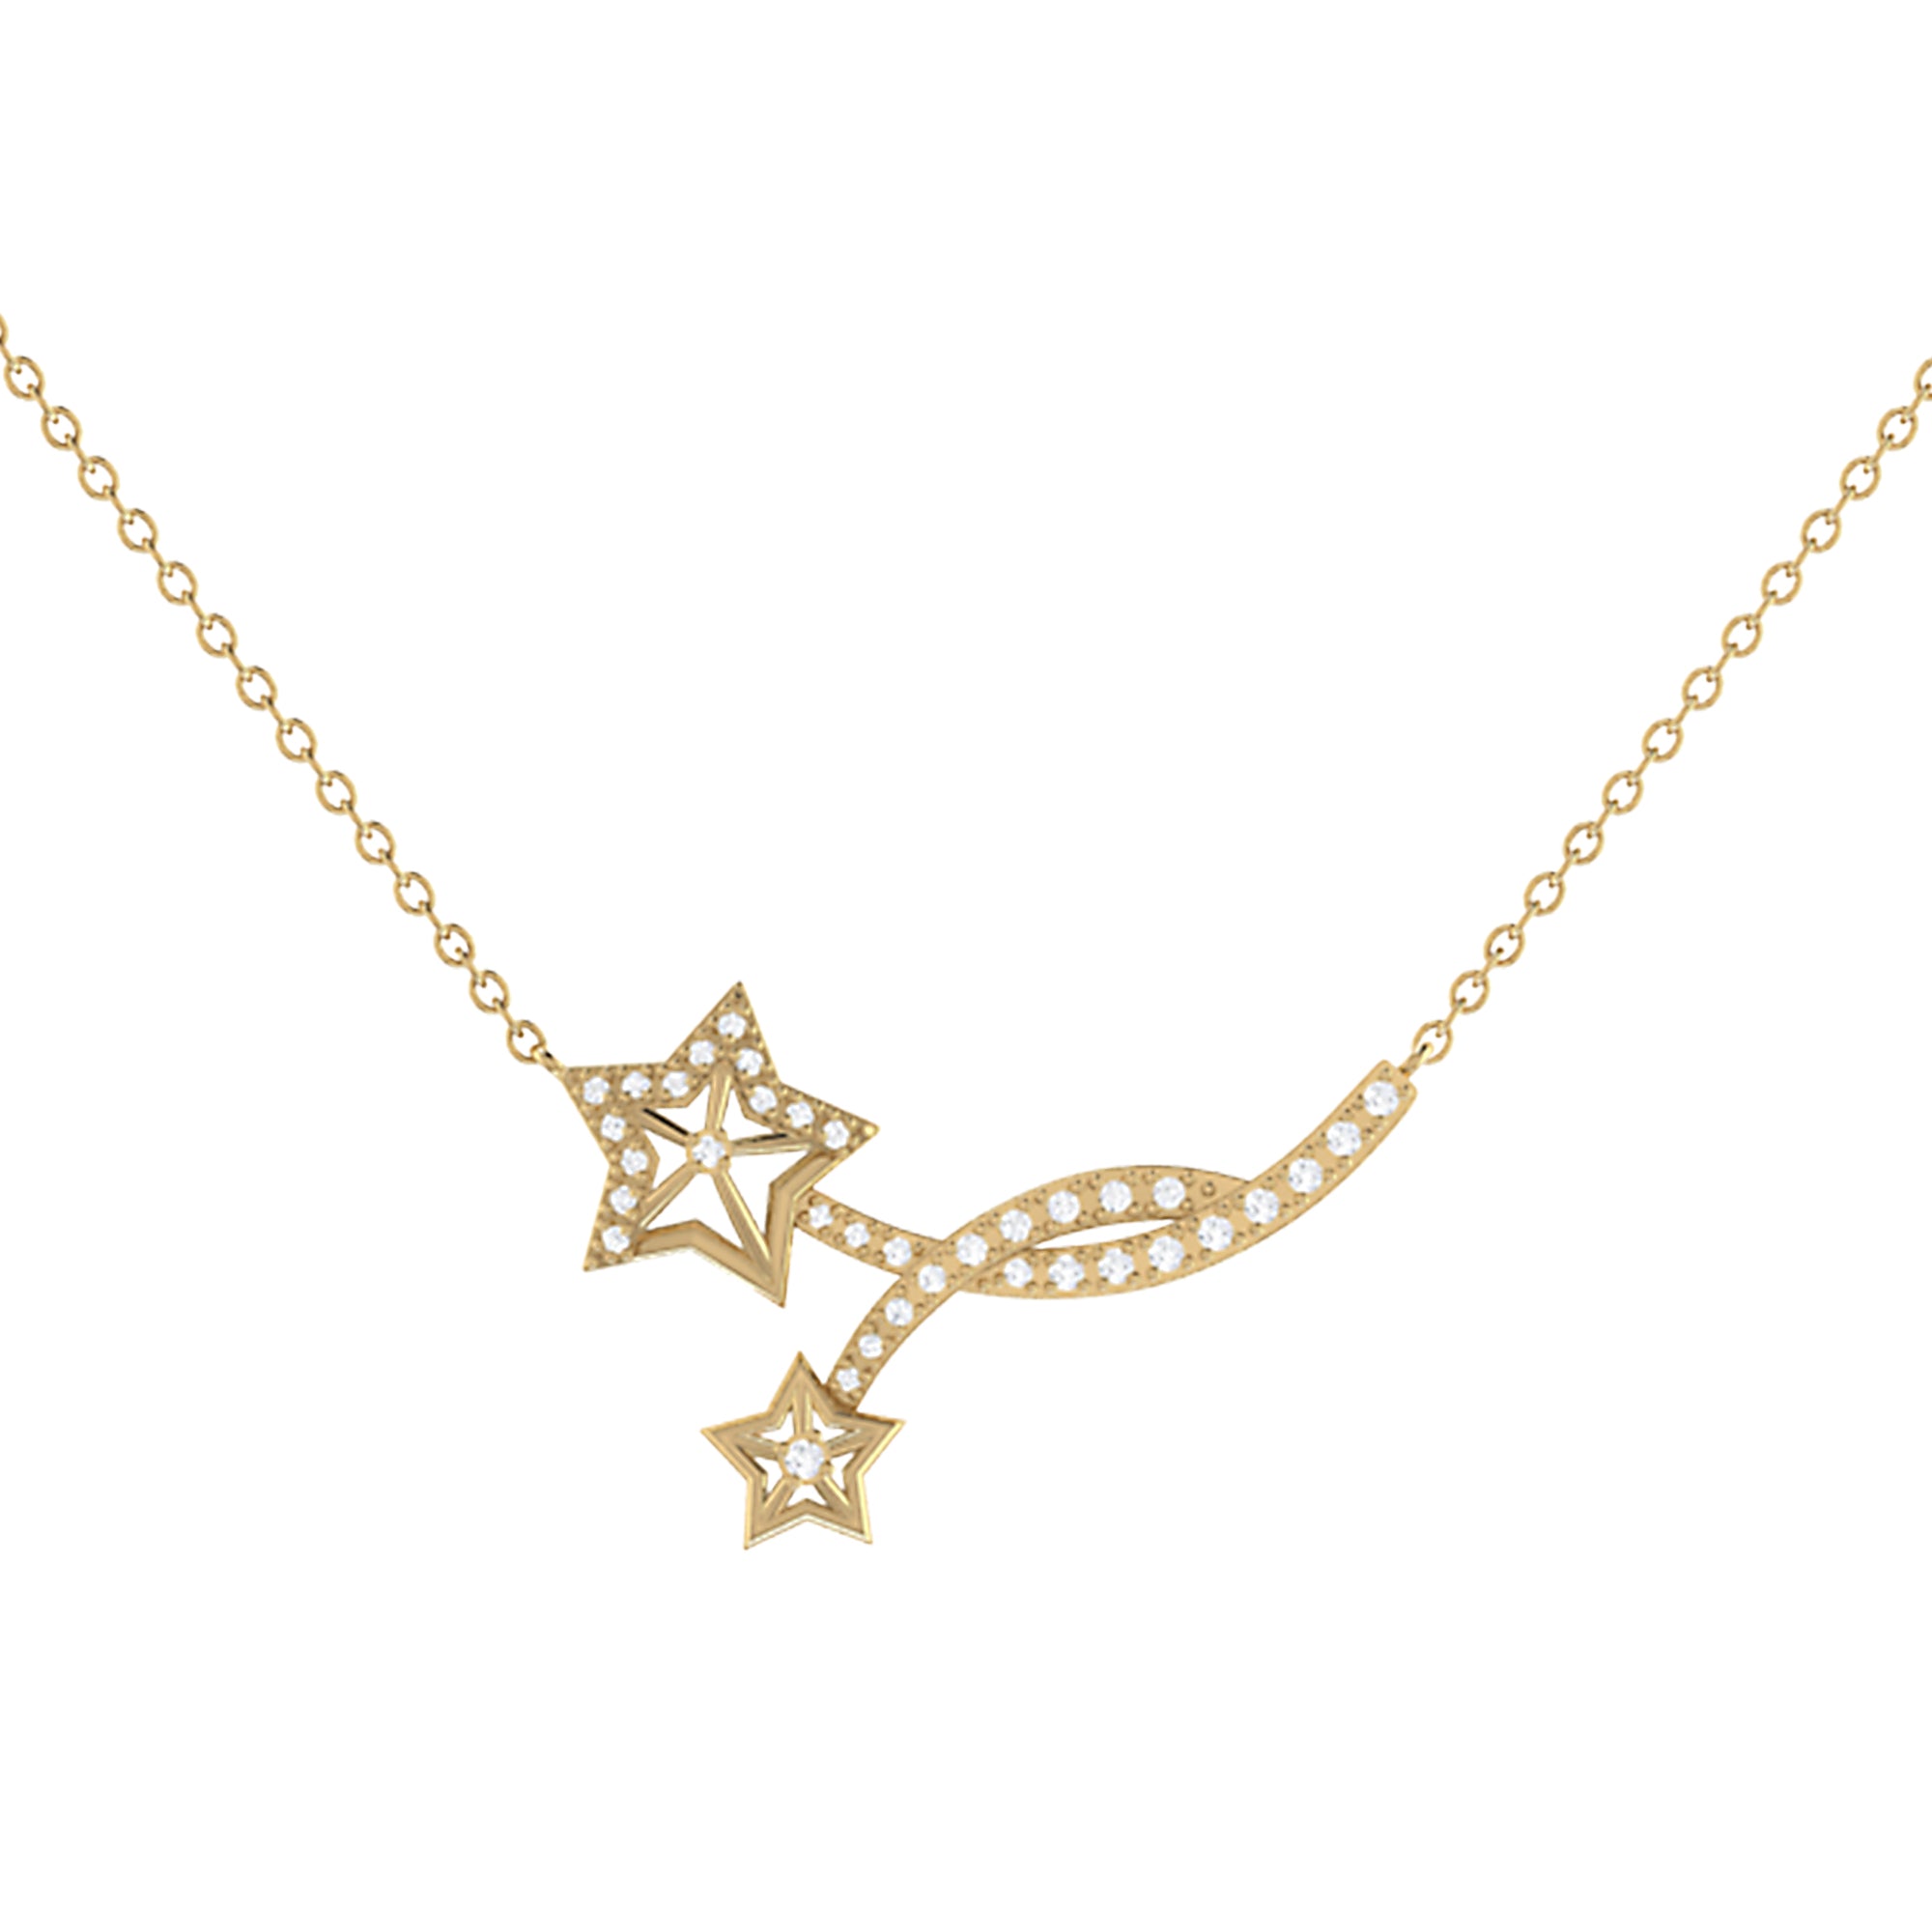 Divergent Stars Diamond Necklace in 14K Yellow Gold